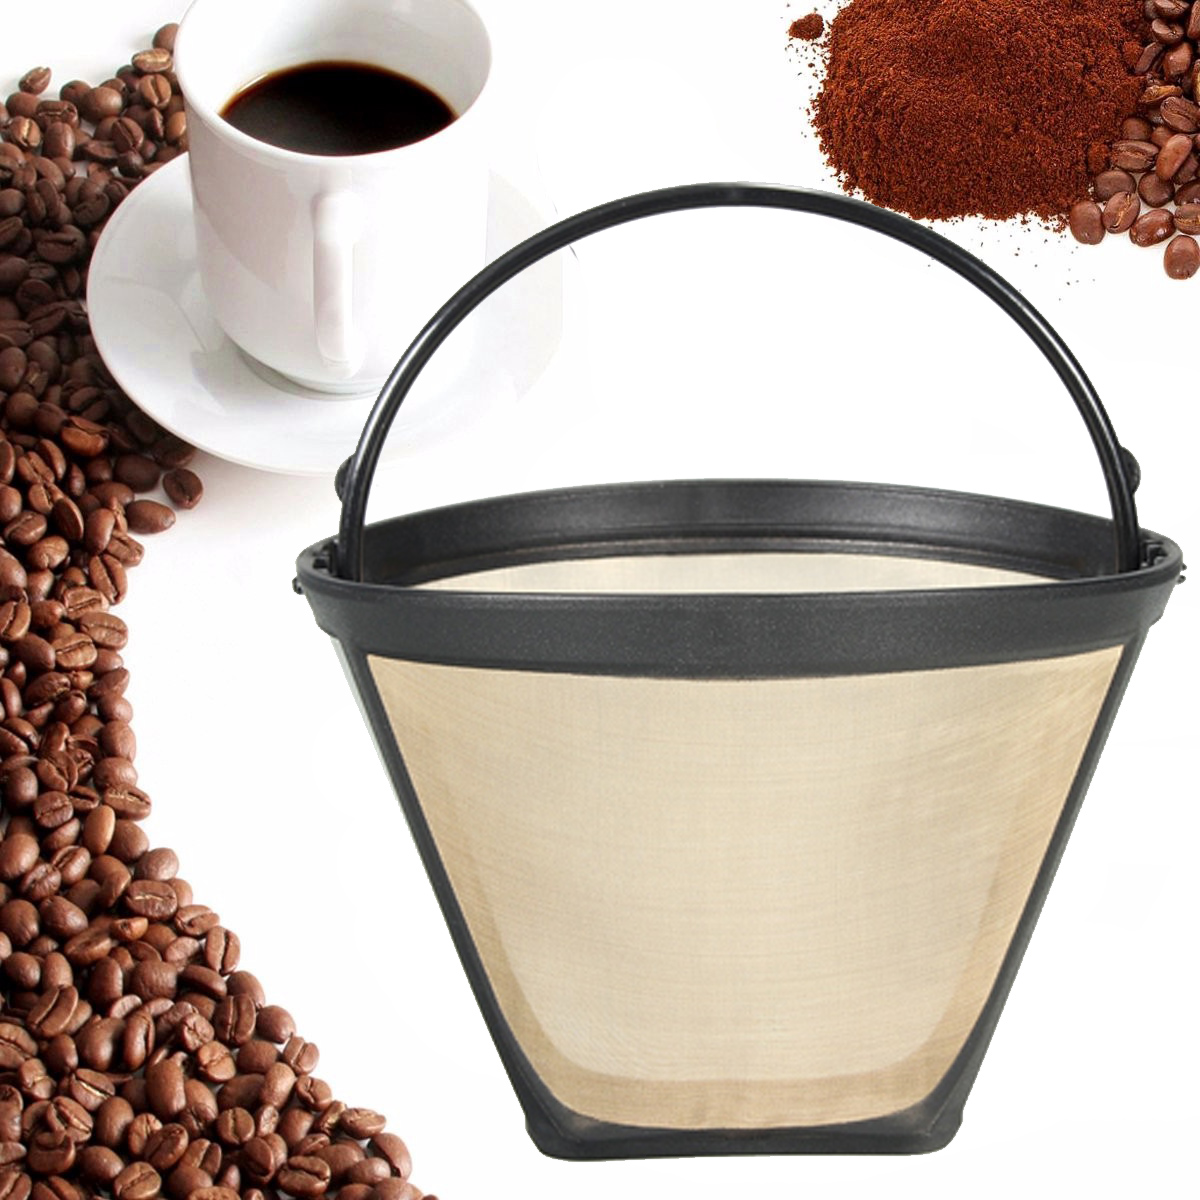 Stainless-Steel-Coffee-Funnel-Filter-Reusable-Tea-Strainers-Wire-Mesh-Basket-1794581-3